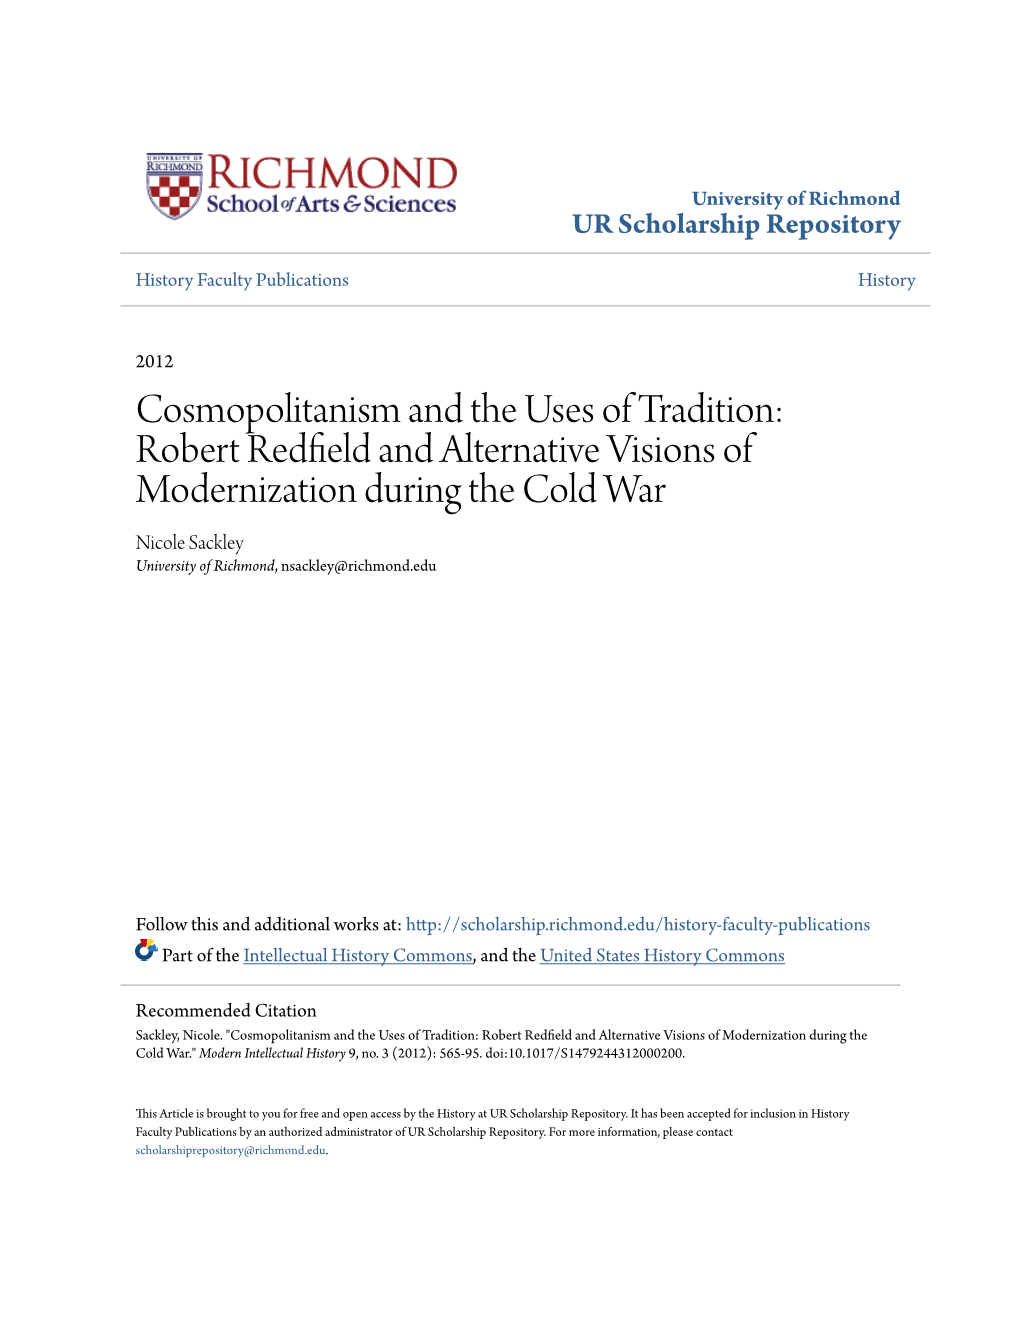 Cosmopolitanism and the Uses of Tradition: Robert Redfield and Alternative Visions of Modernization During the Cold War." Modern Intellectual History 9, No